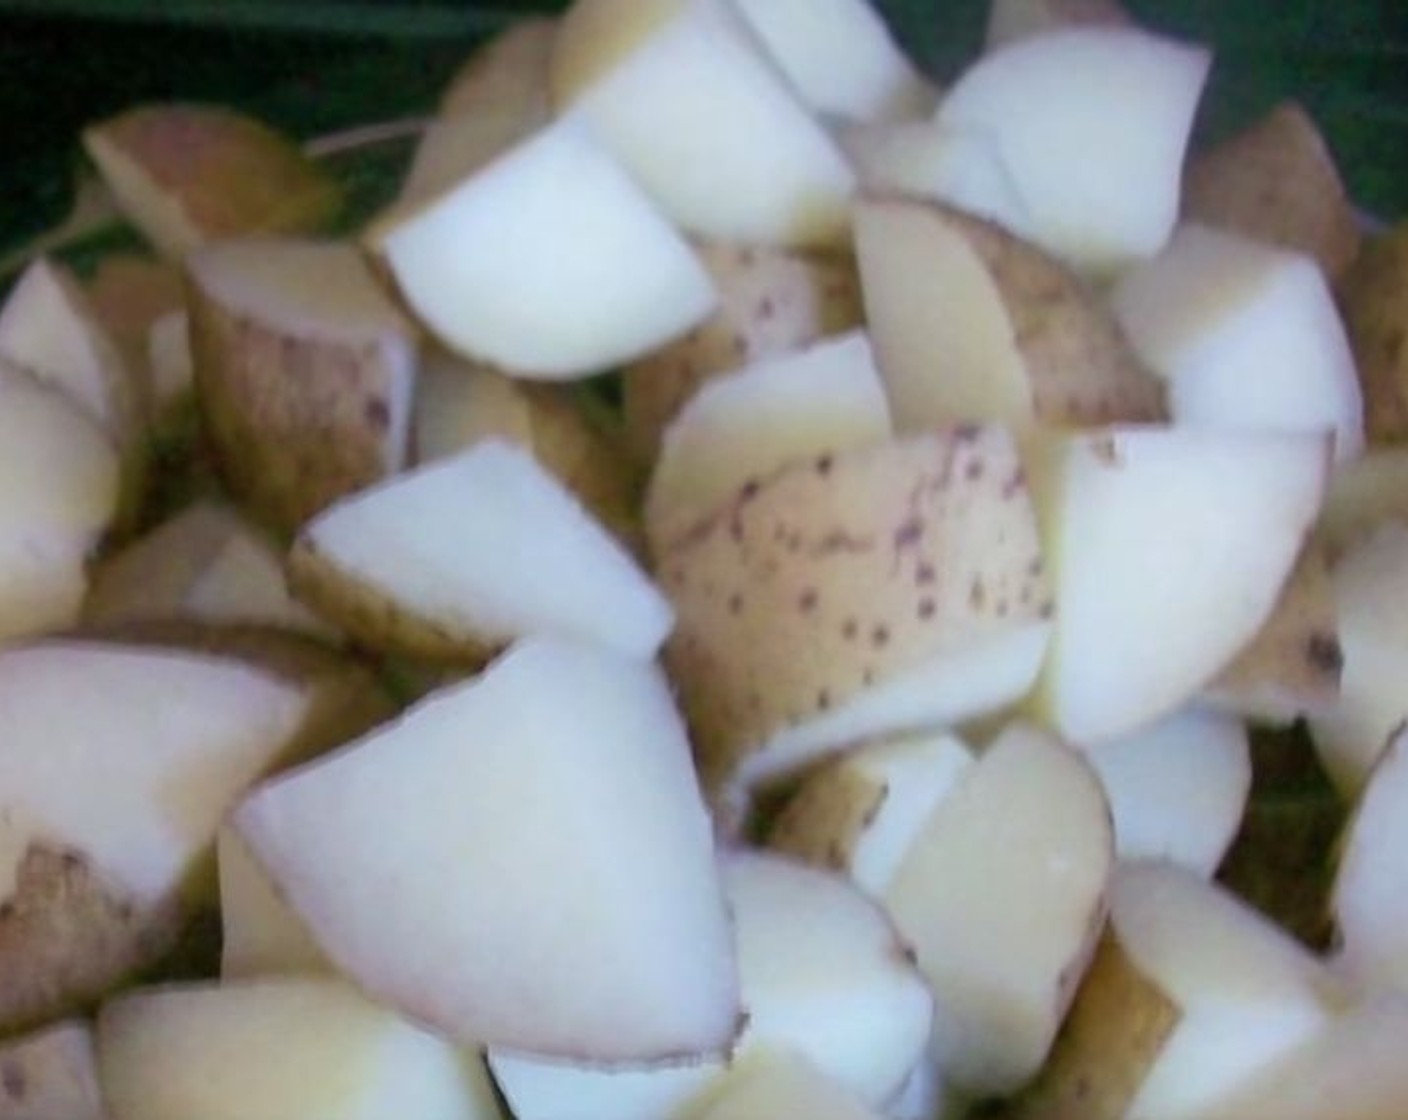 step 1 Place Potatoes (3 lb) in a pot with hot water and Salt (1 tsp). Bring to boil and cook potatoes for about 10 minutes, until just tender. Do not overcook.